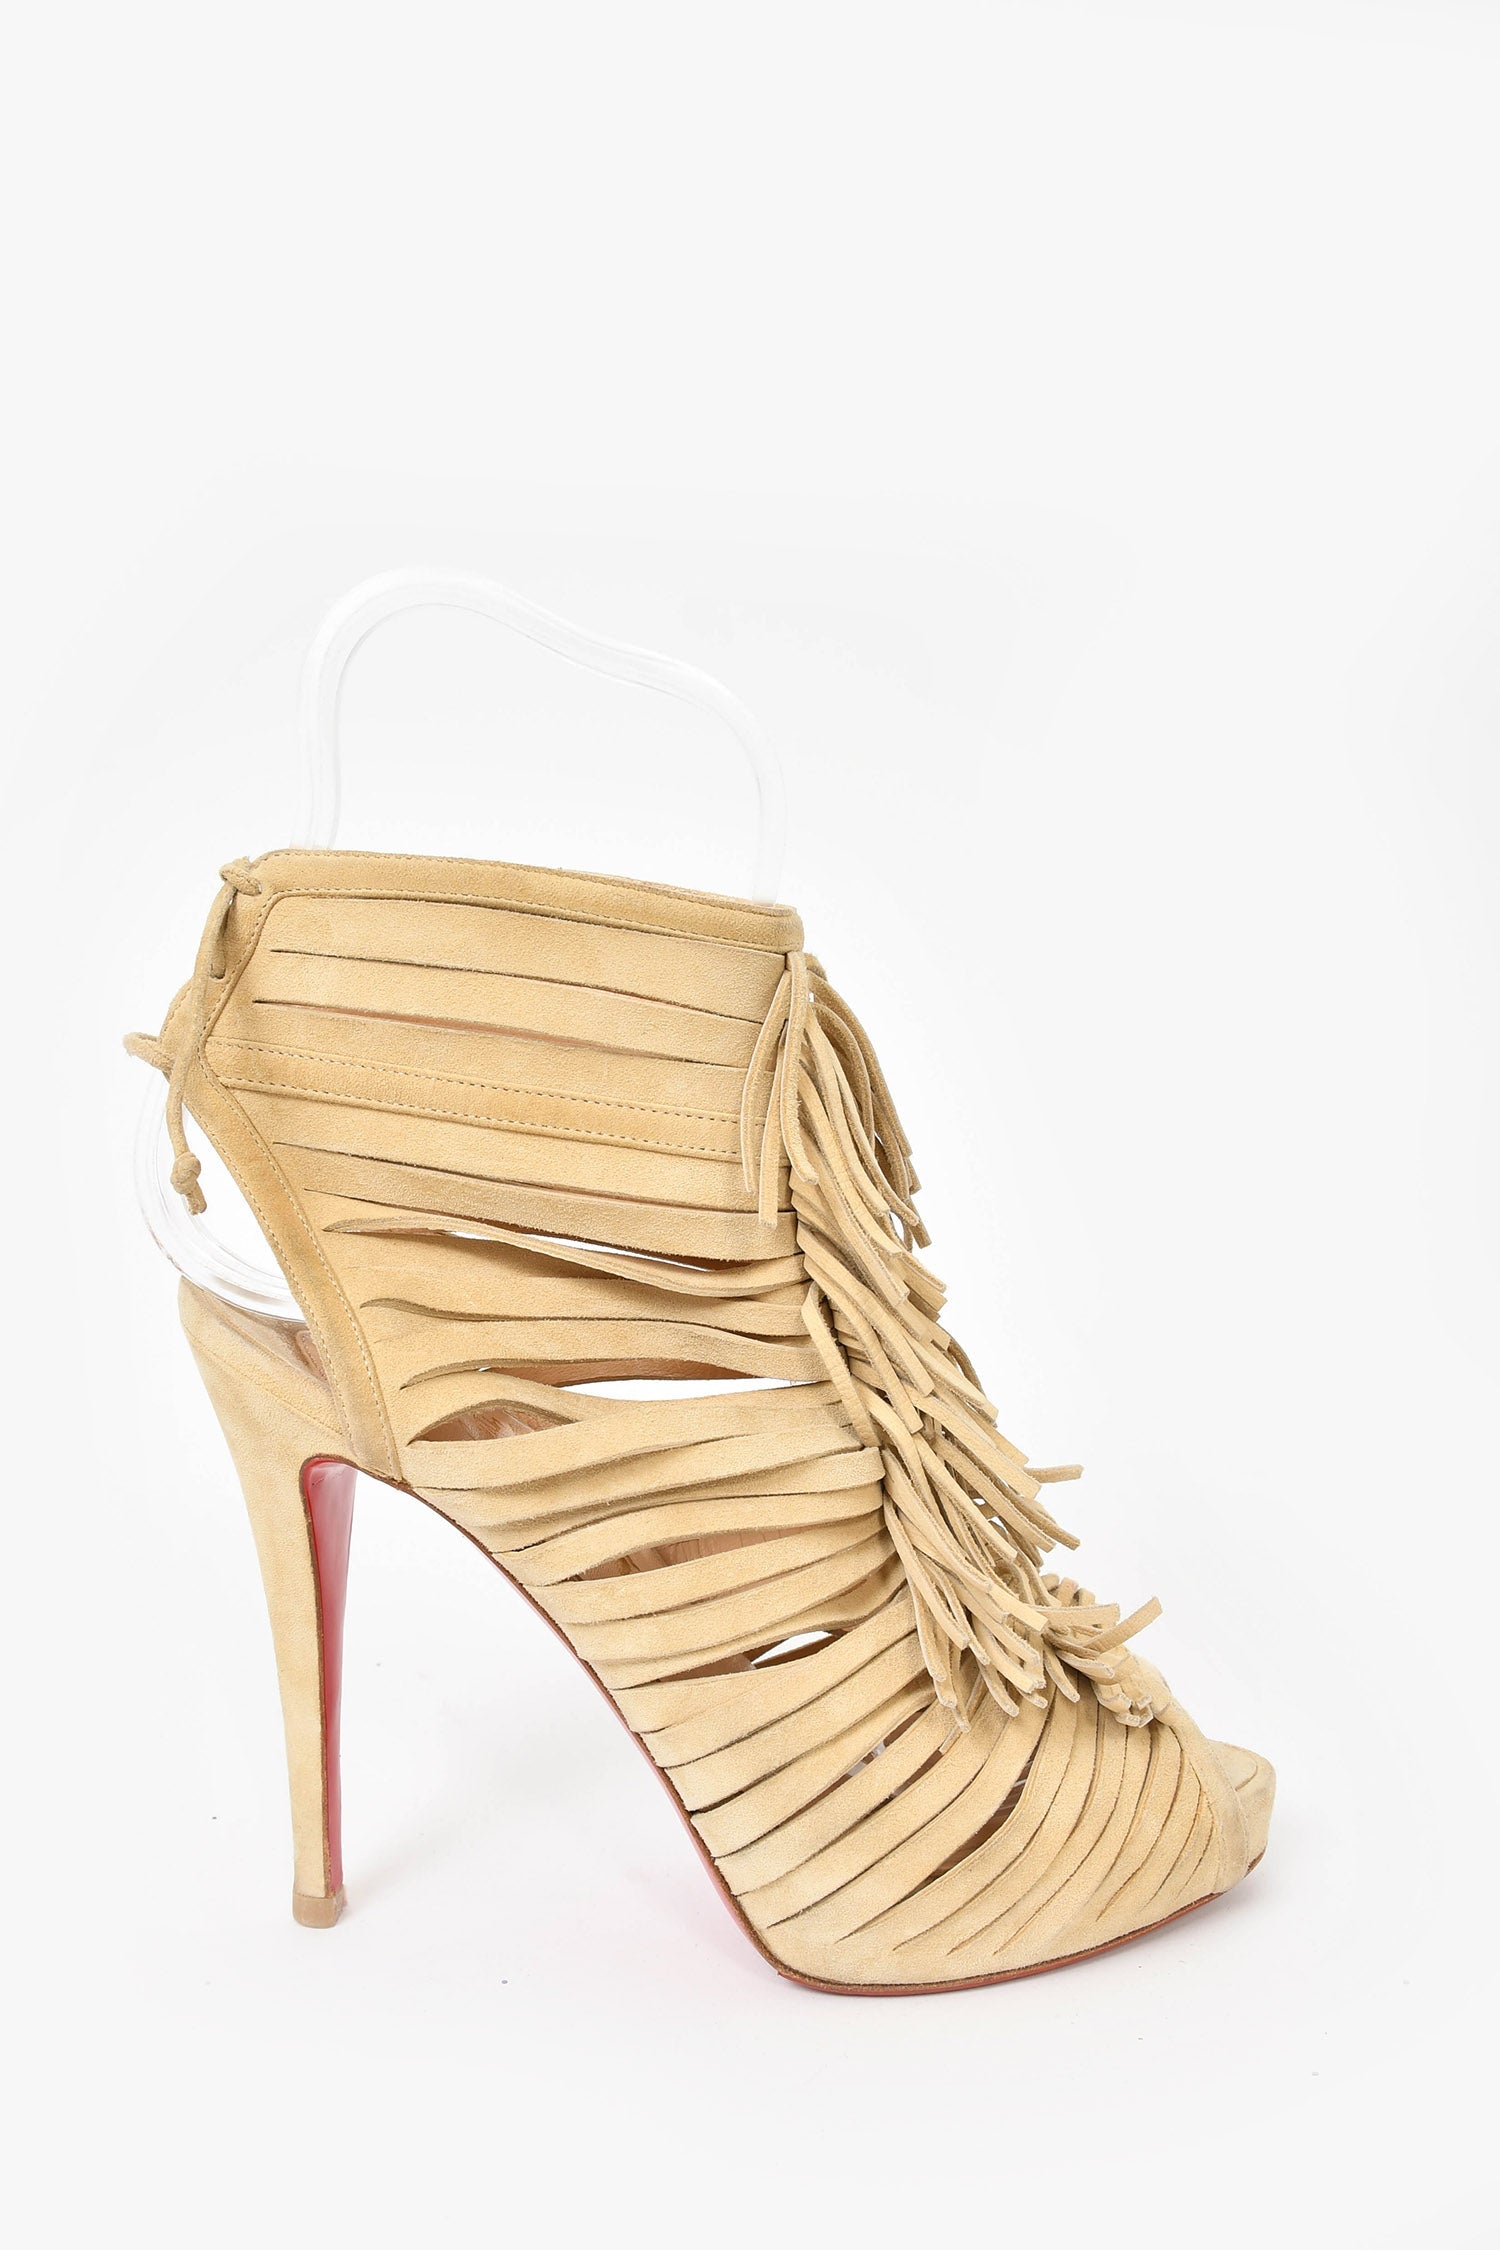 Christian Louboutin Suede Fringe Heels Size 38 – Mine & Yours